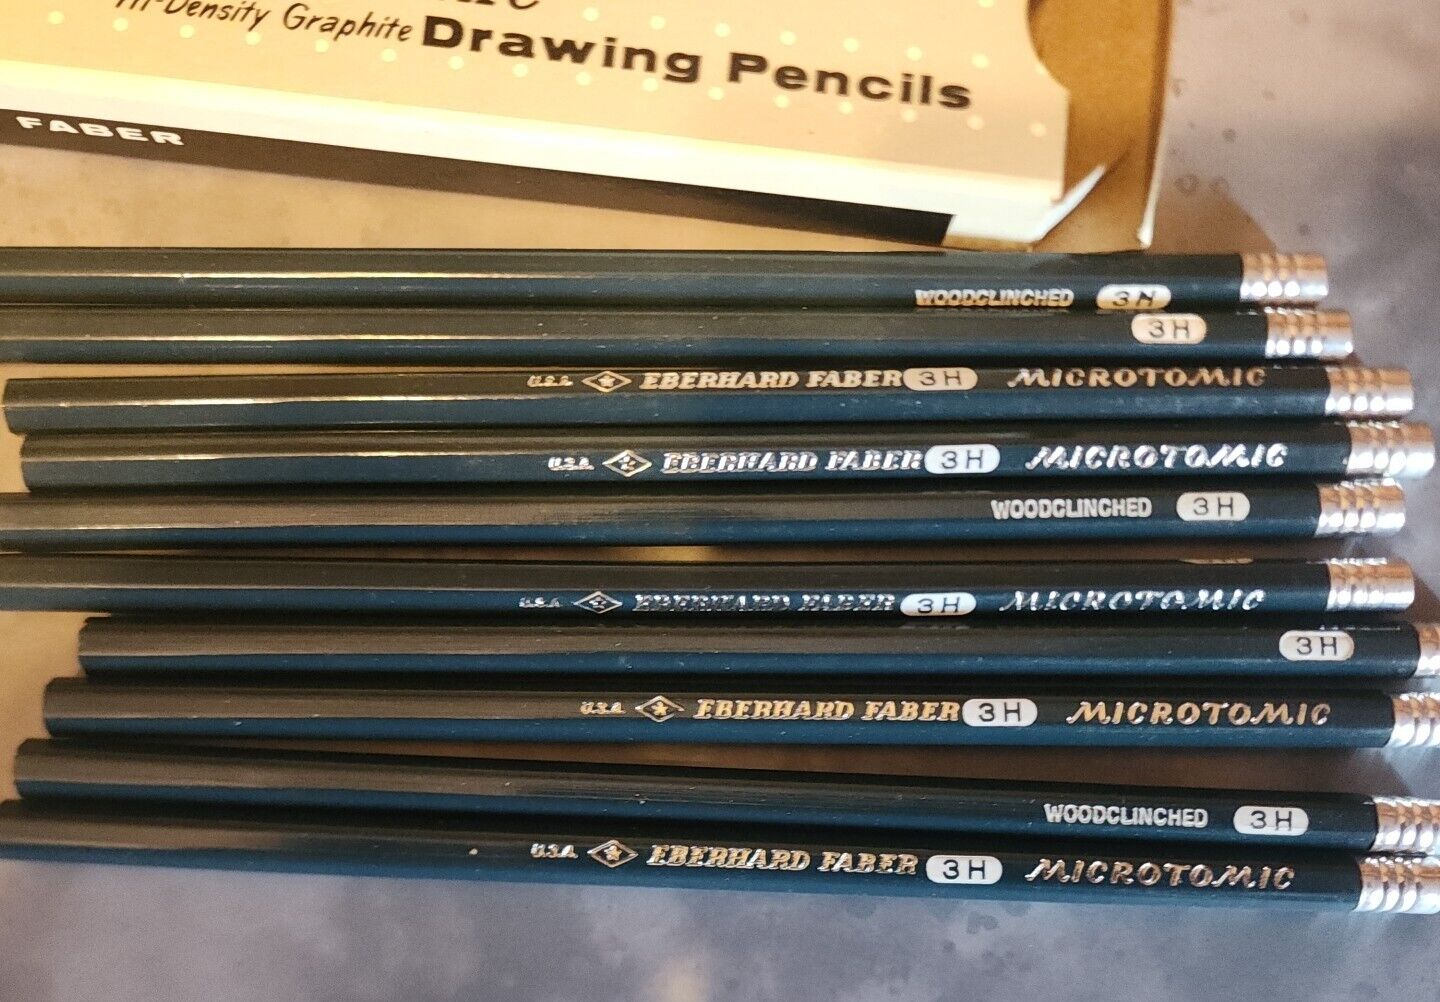 Vintage Eberhard Faber Microtomic 600 3H Drawing Pencils - Set of 10 with Box